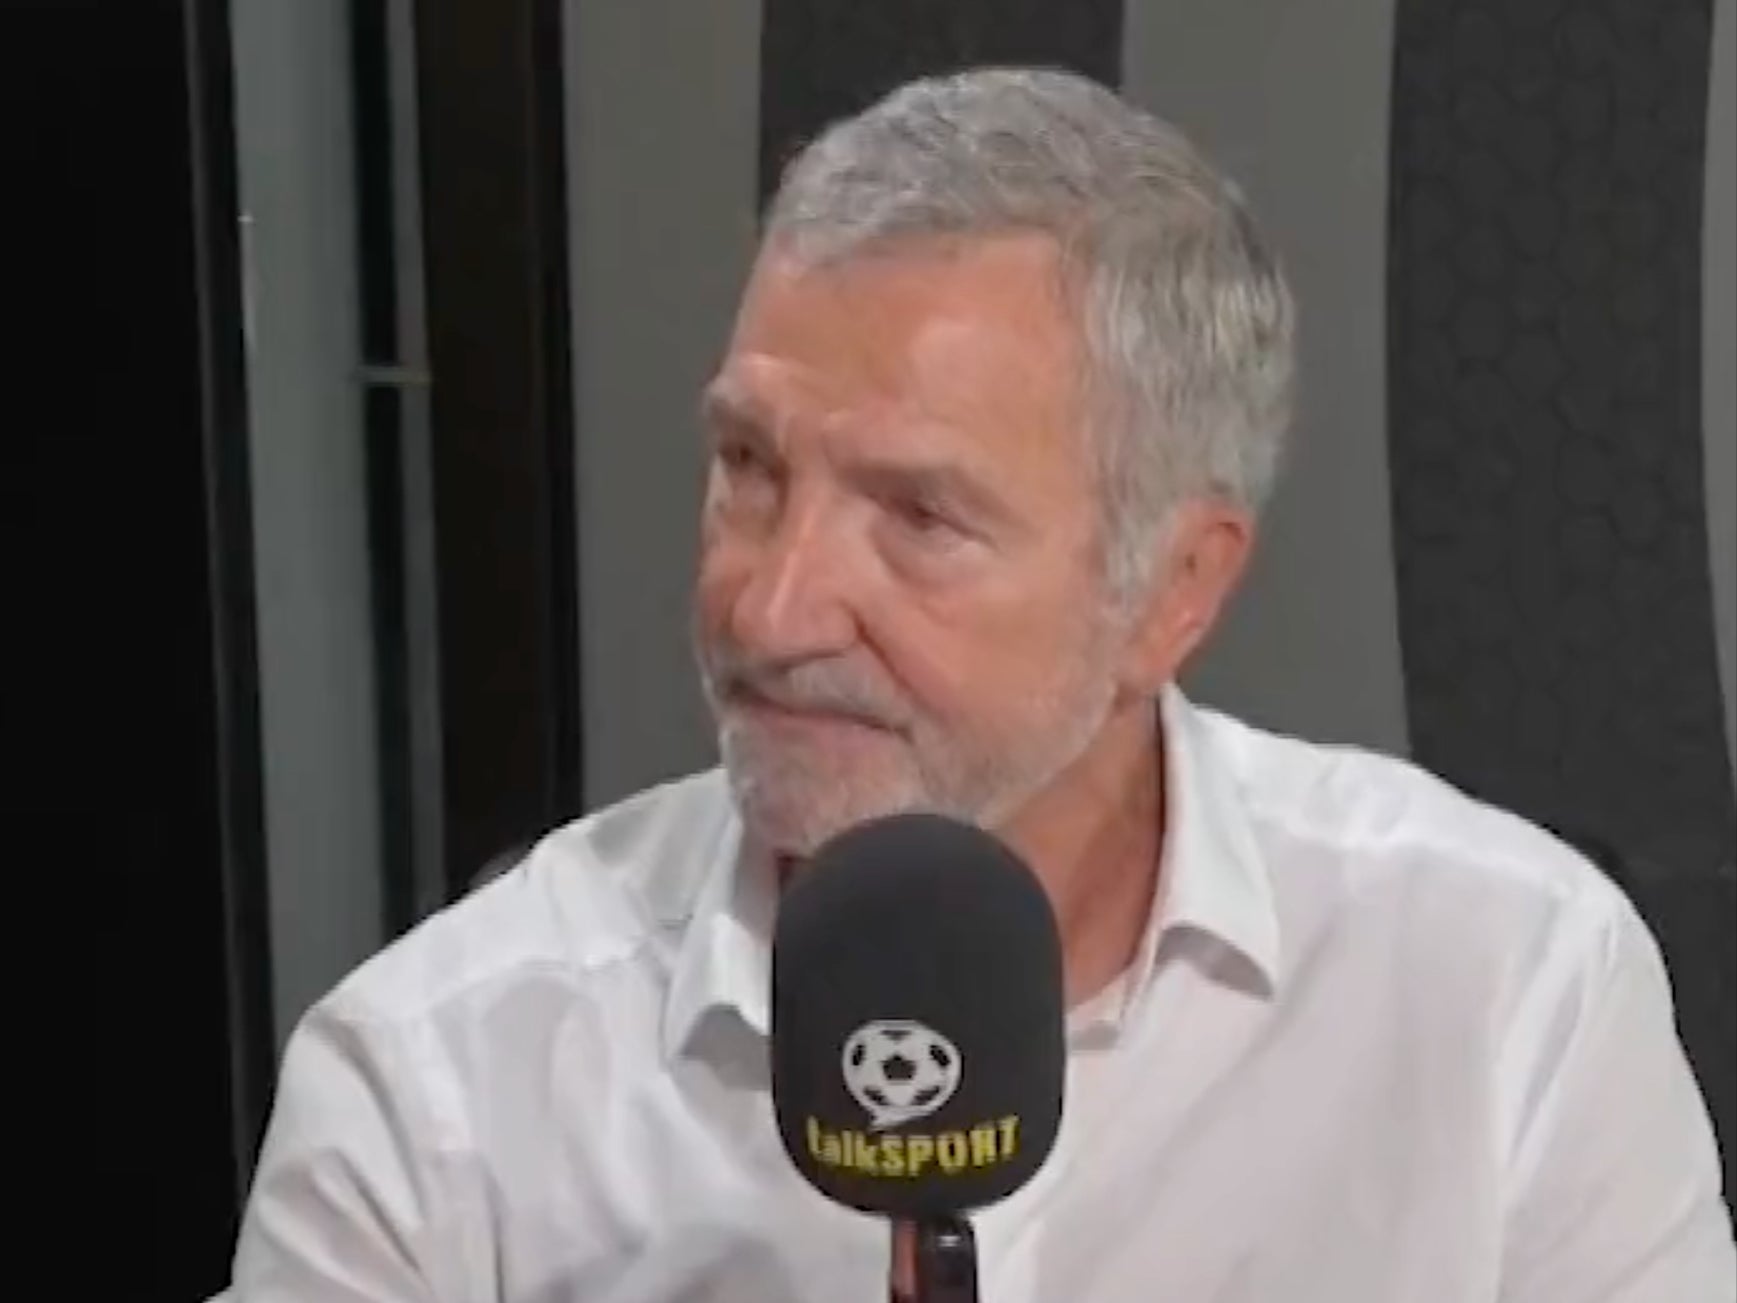 Souness has moved to defend his comments